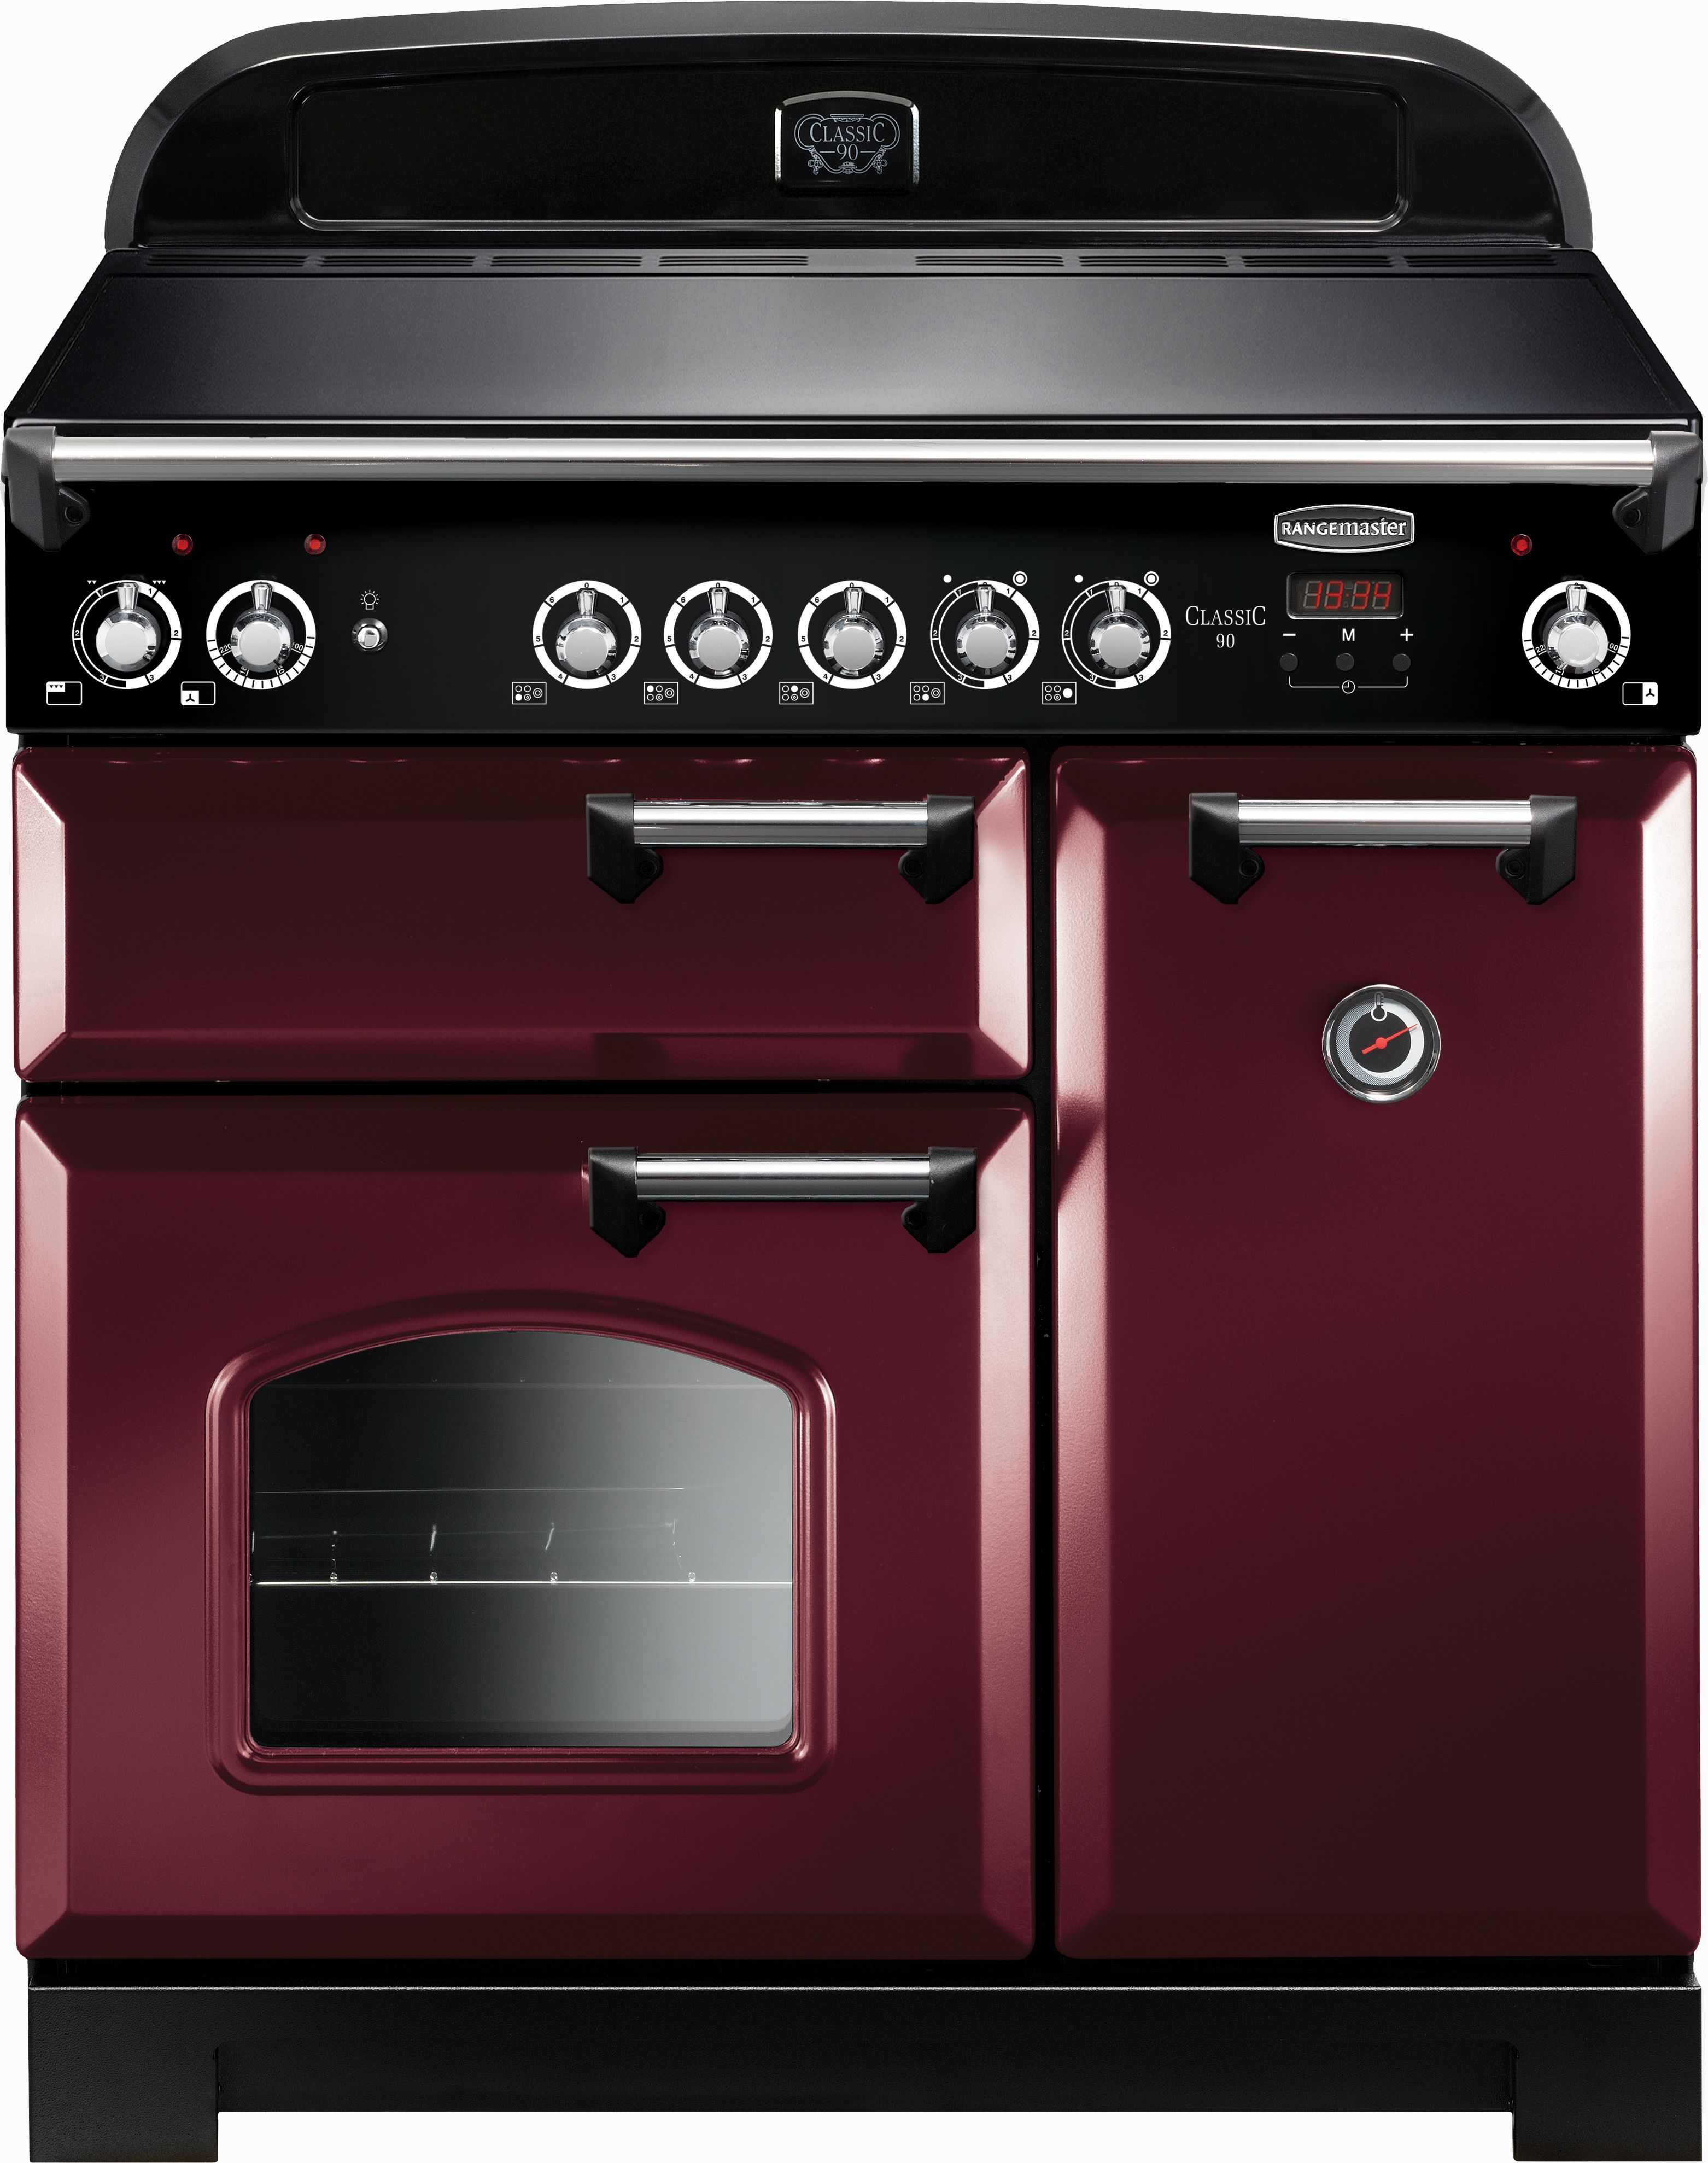 Rangemaster Classic CLA90ECCY/C 90cm Electric Range Cooker with Ceramic Hob - Cranberry / Chrome - A/A Rated, Red